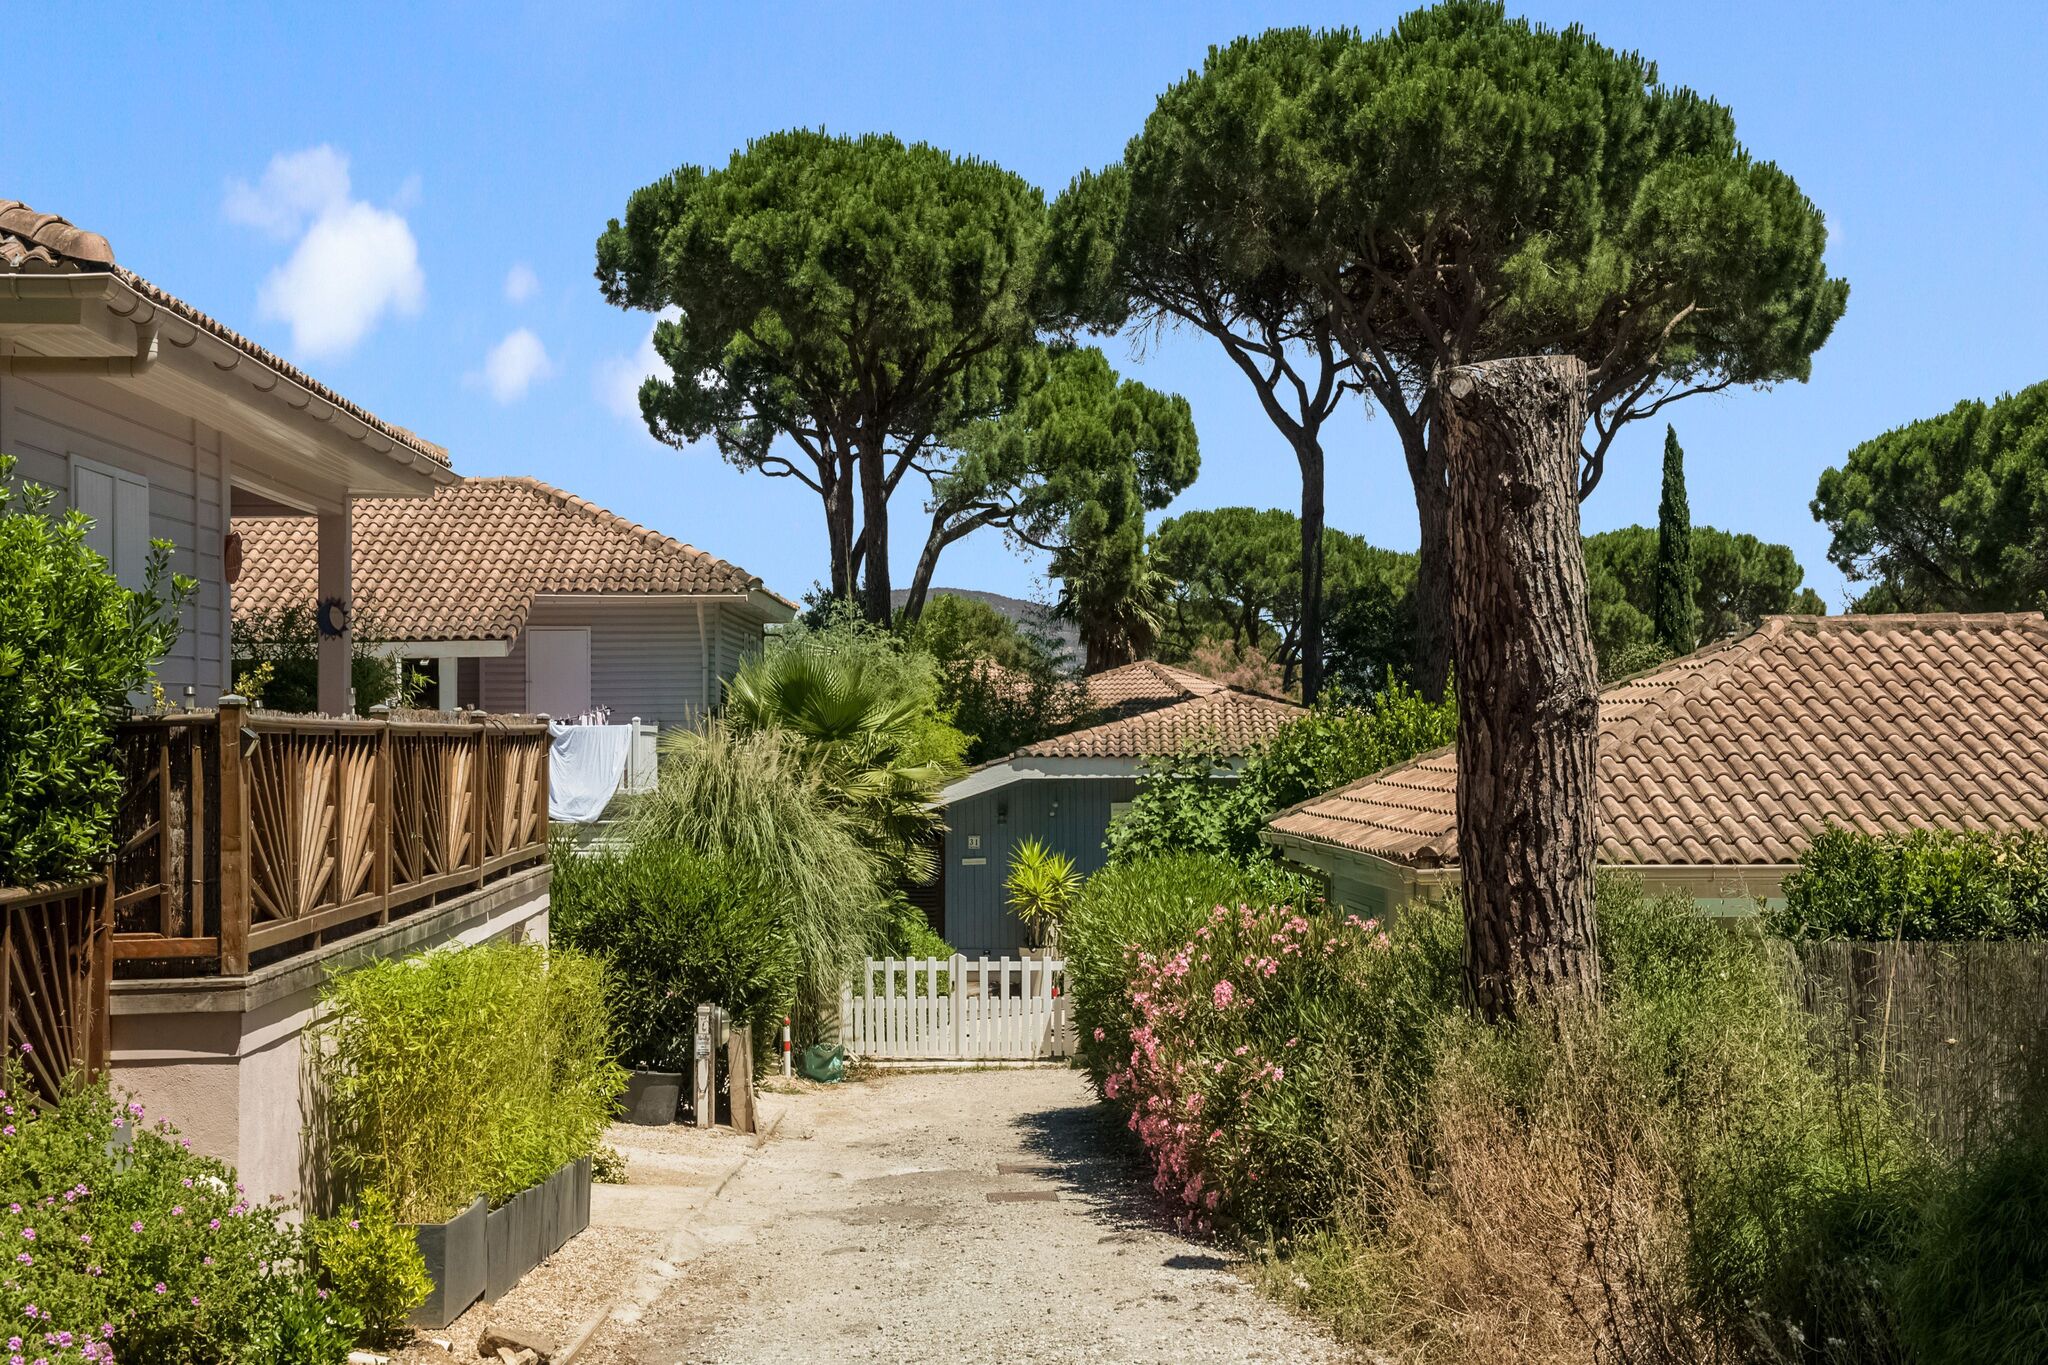 Holiday home Lavande near Saint-Tropez with private terrace